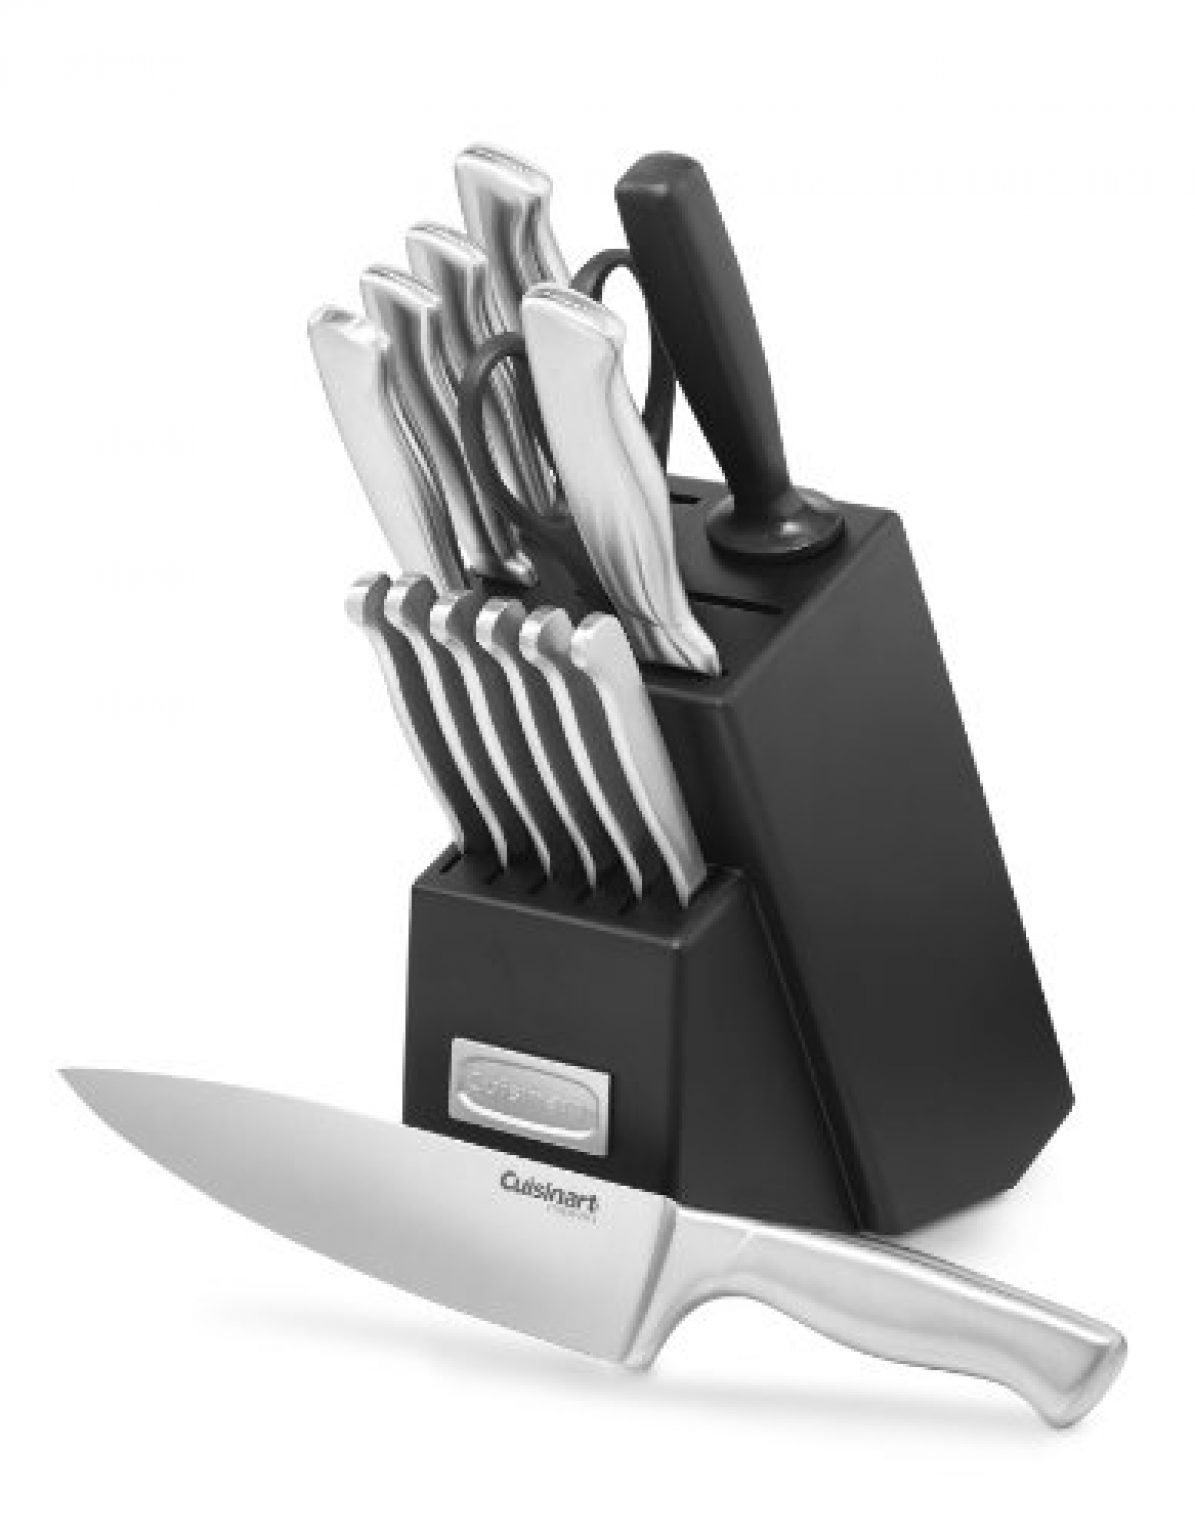 CUISINART 15 Piece Stainless Steel Hollow Handle Block Set — Deals from Cuisinart 15 Piece Stainless Steel Hollow Handle Block Set